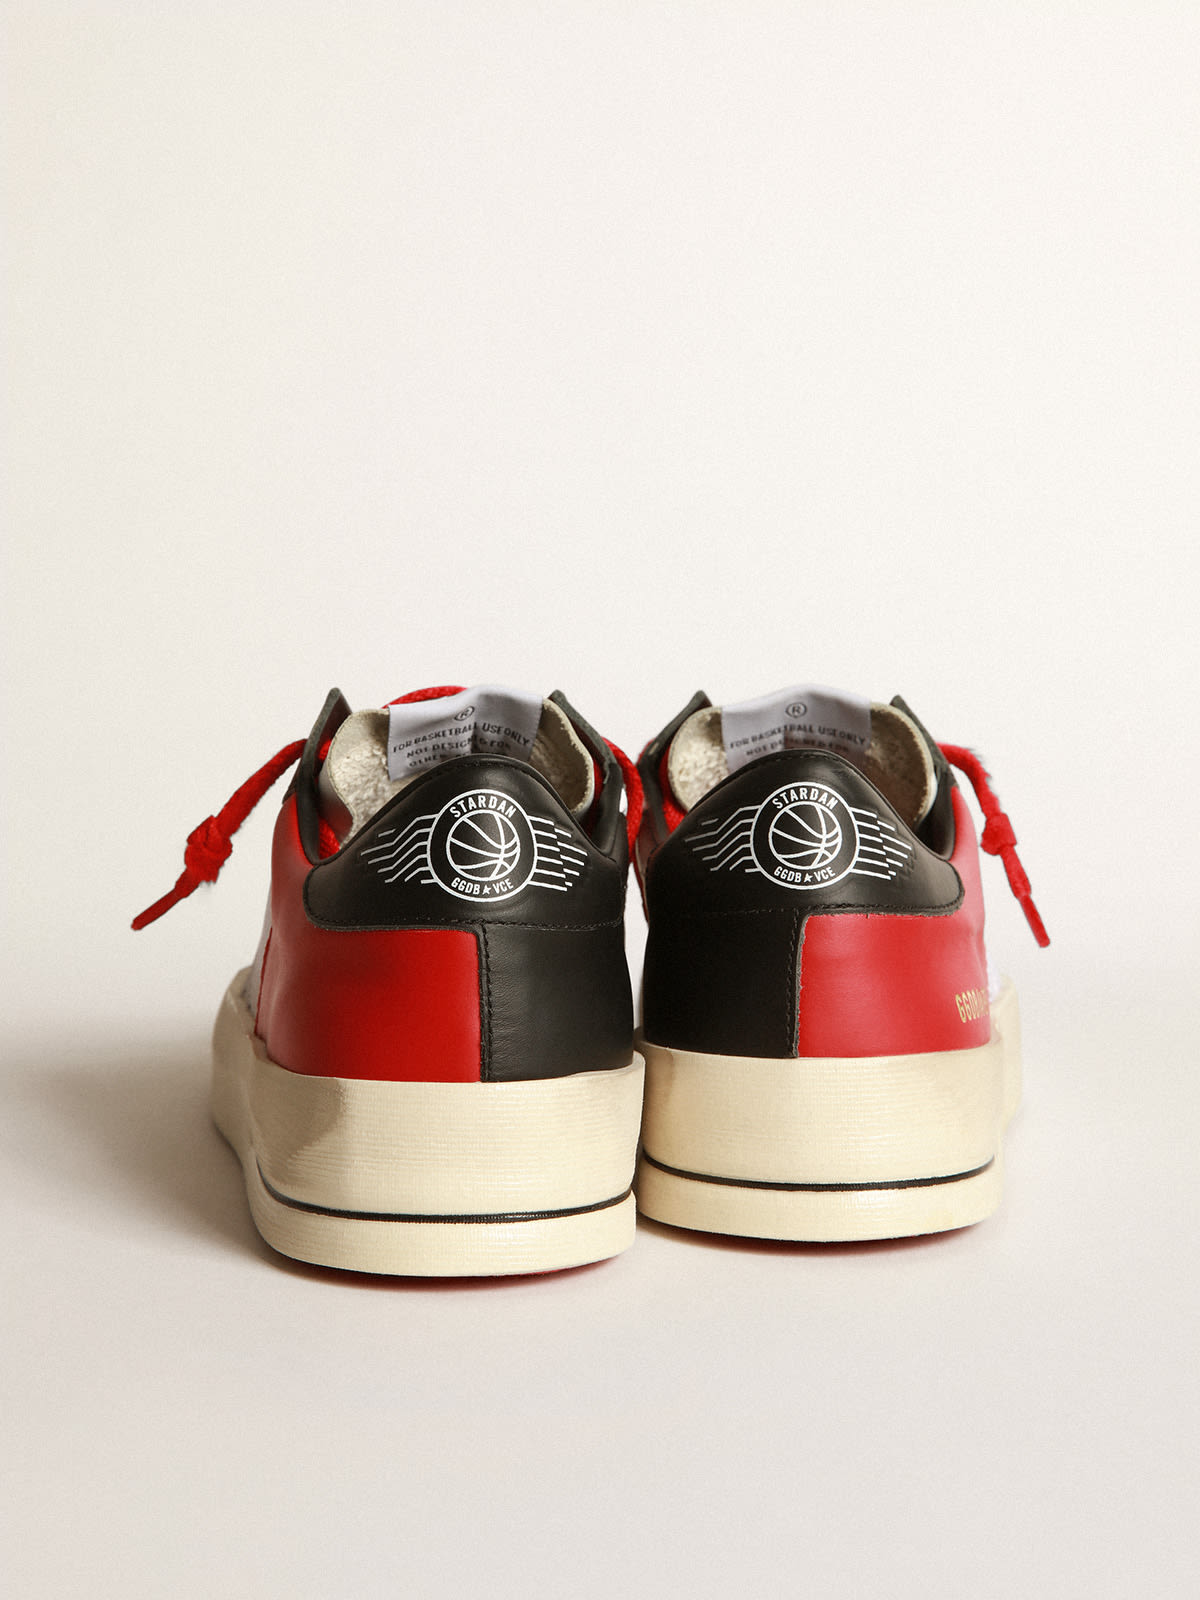 Golden Goose - Stardan sneakers in red and white leather with mesh inserts in 